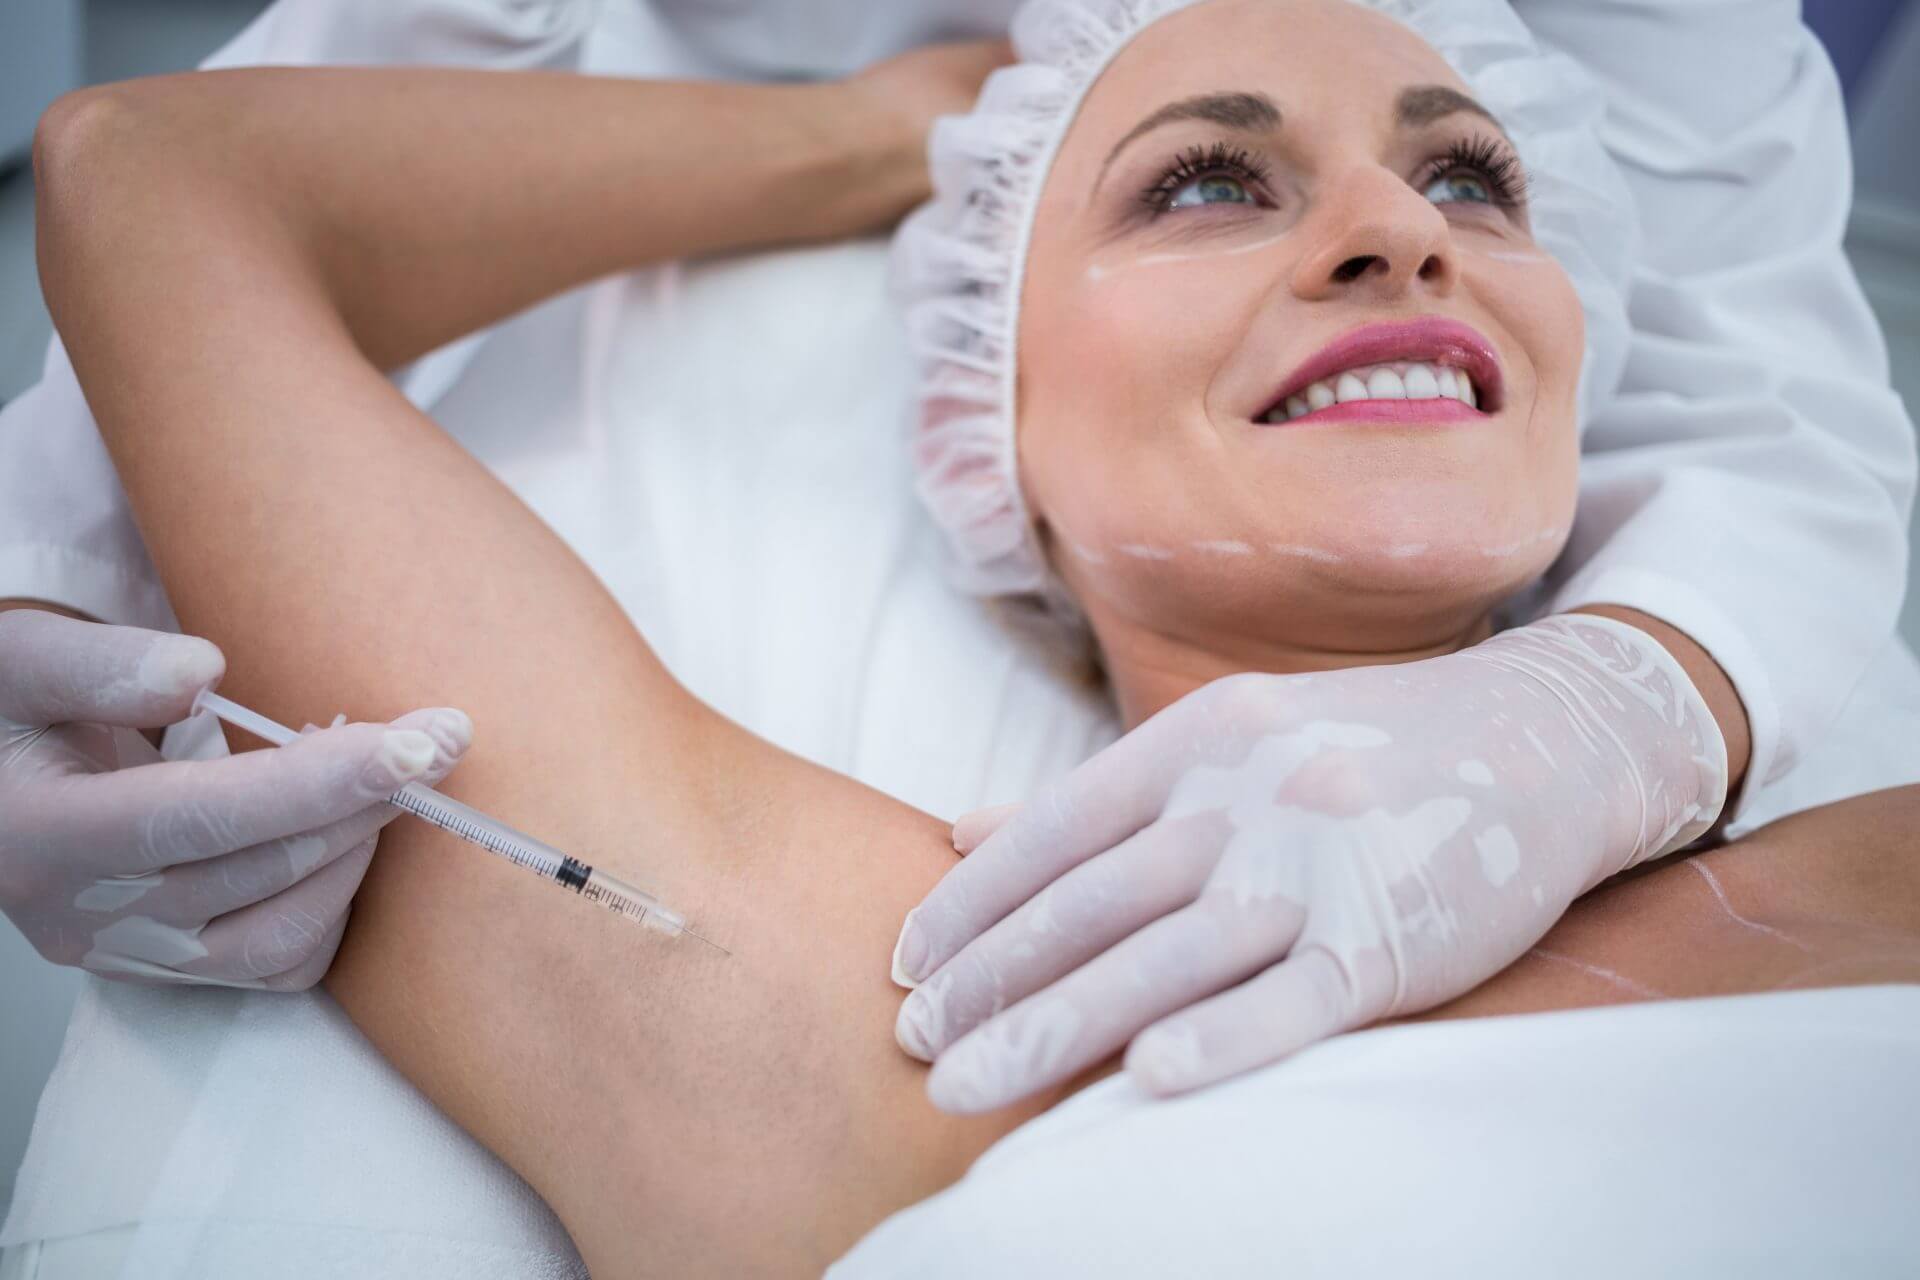 Doctor administering an injection into a smiling woman's armpit.